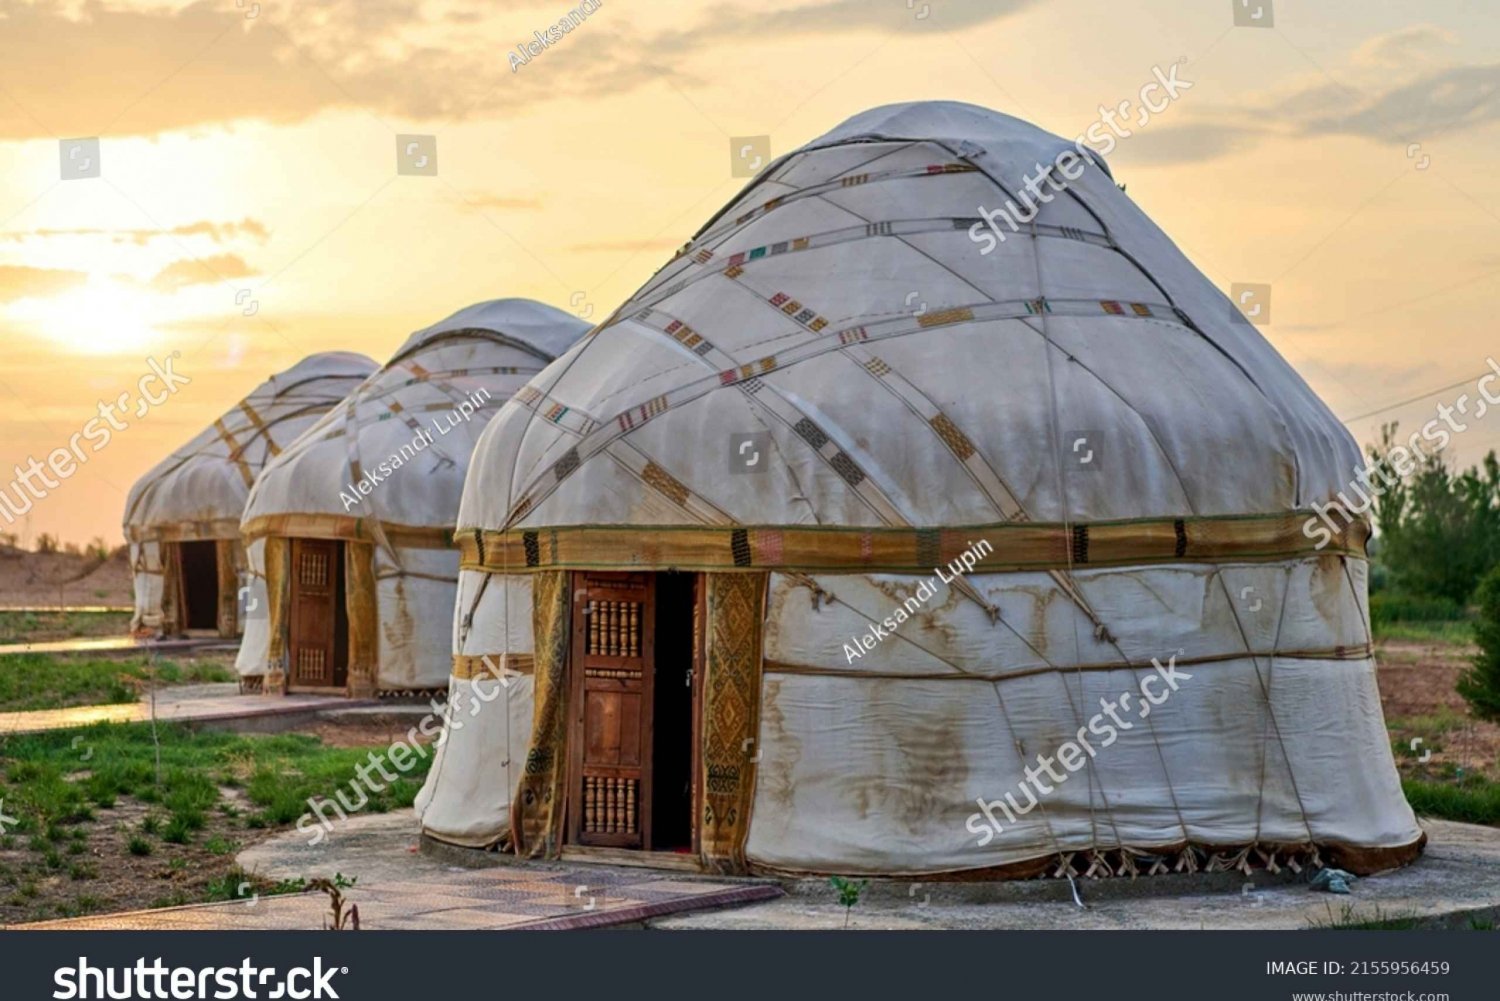 Camping in Kazakh Yurts, Horseriding, Barbecue from Almaty